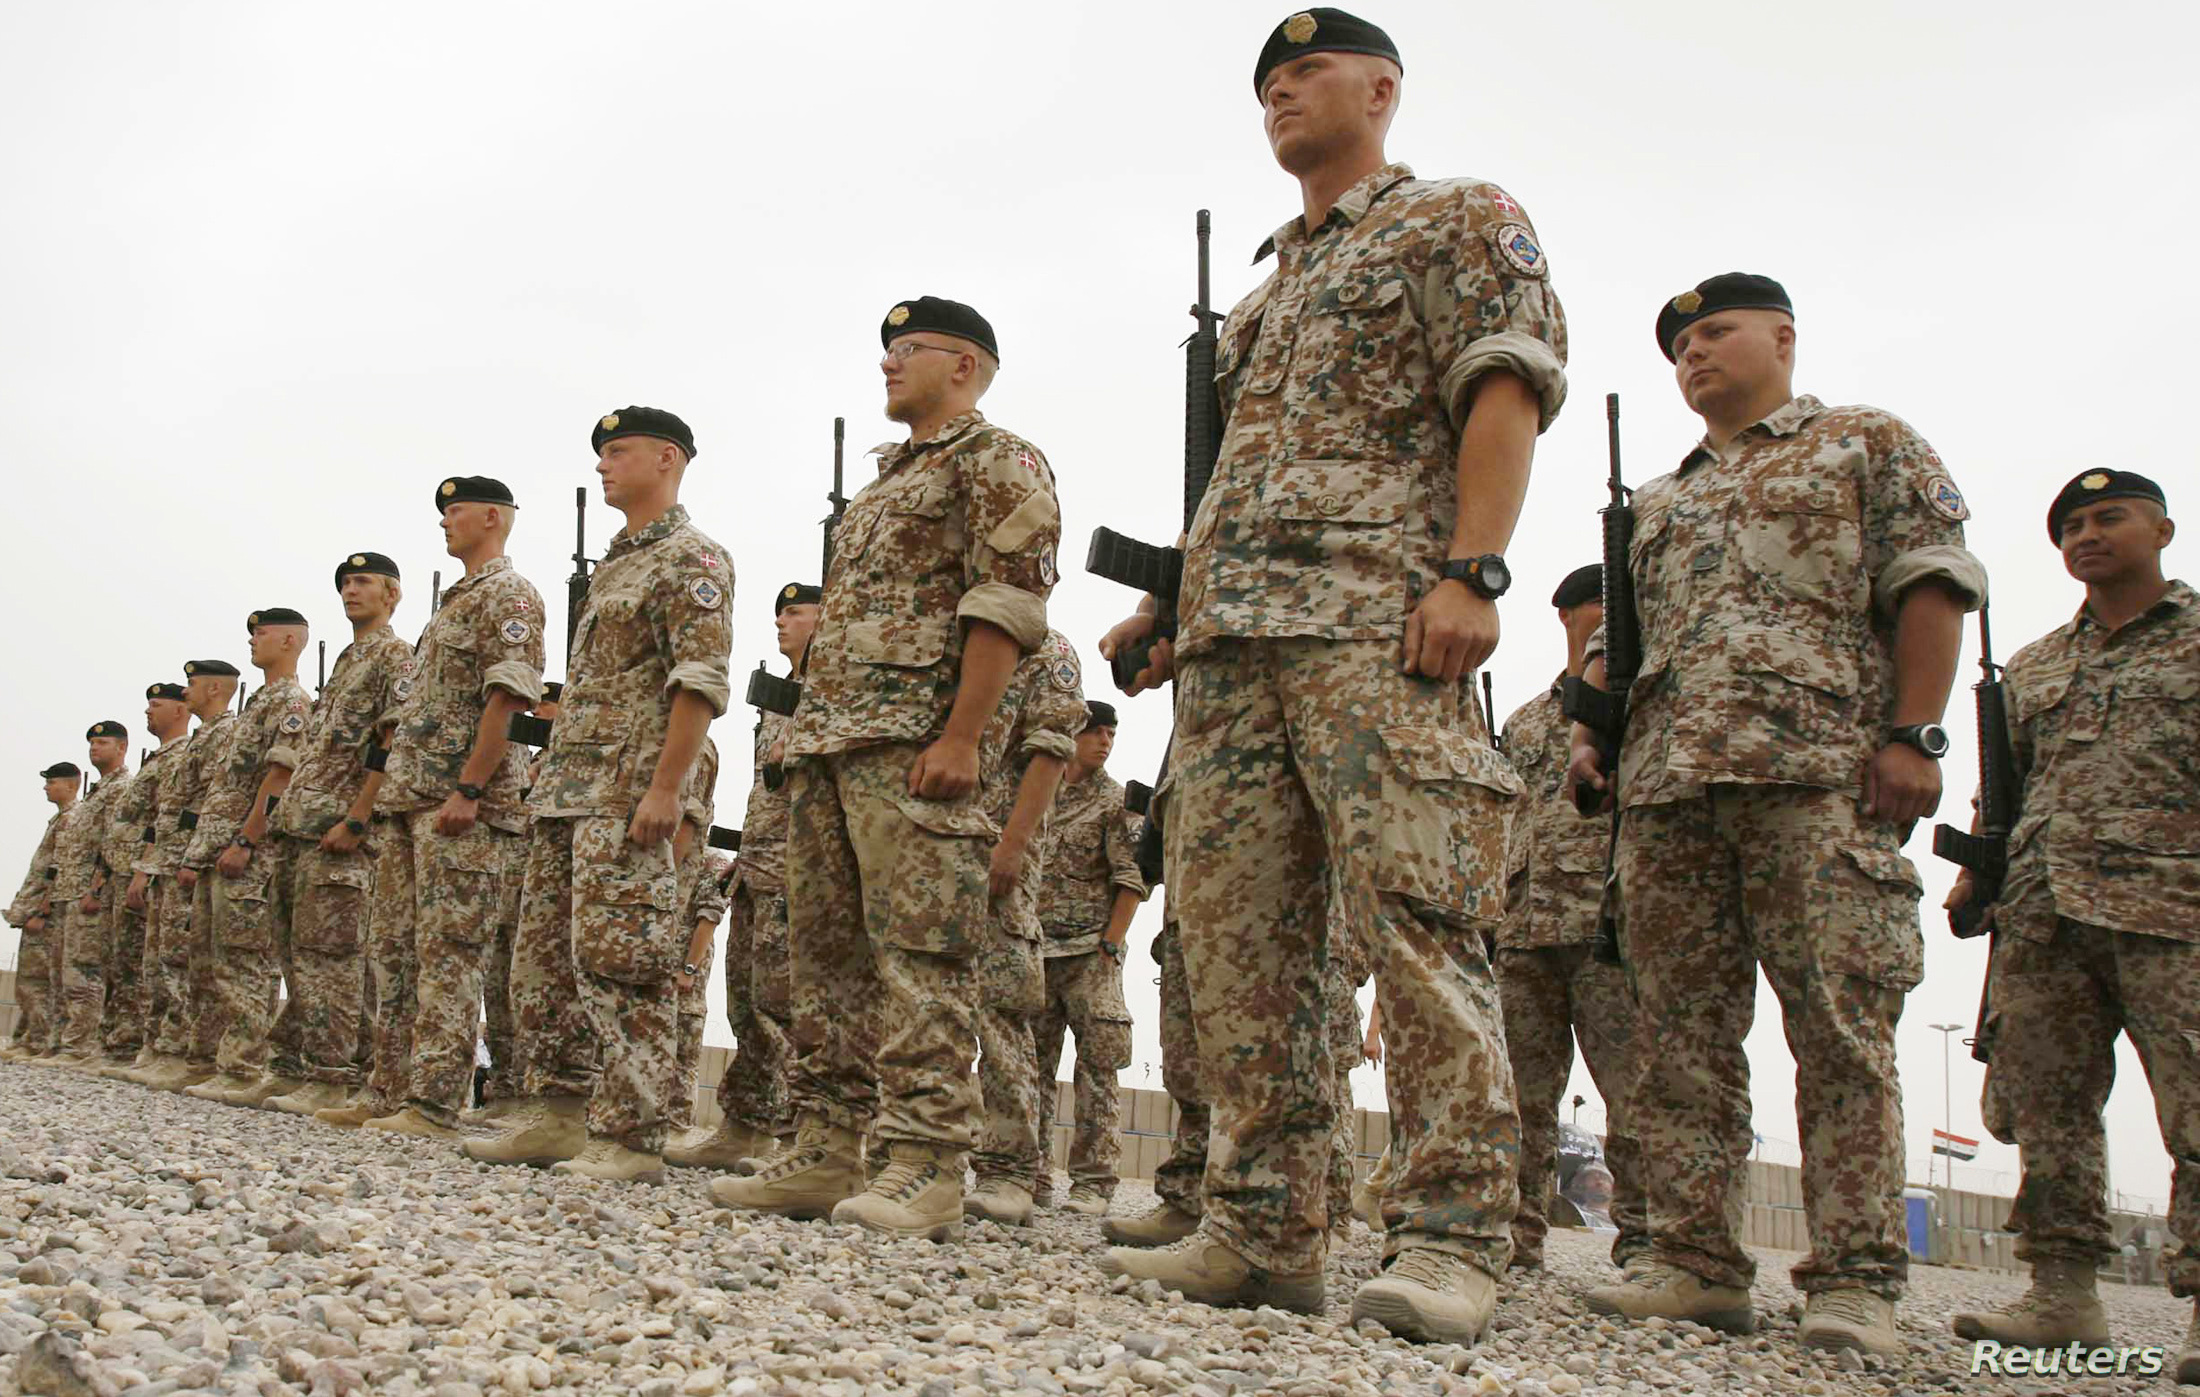 Denmark to send 285 soldiers to train Iraqi forces